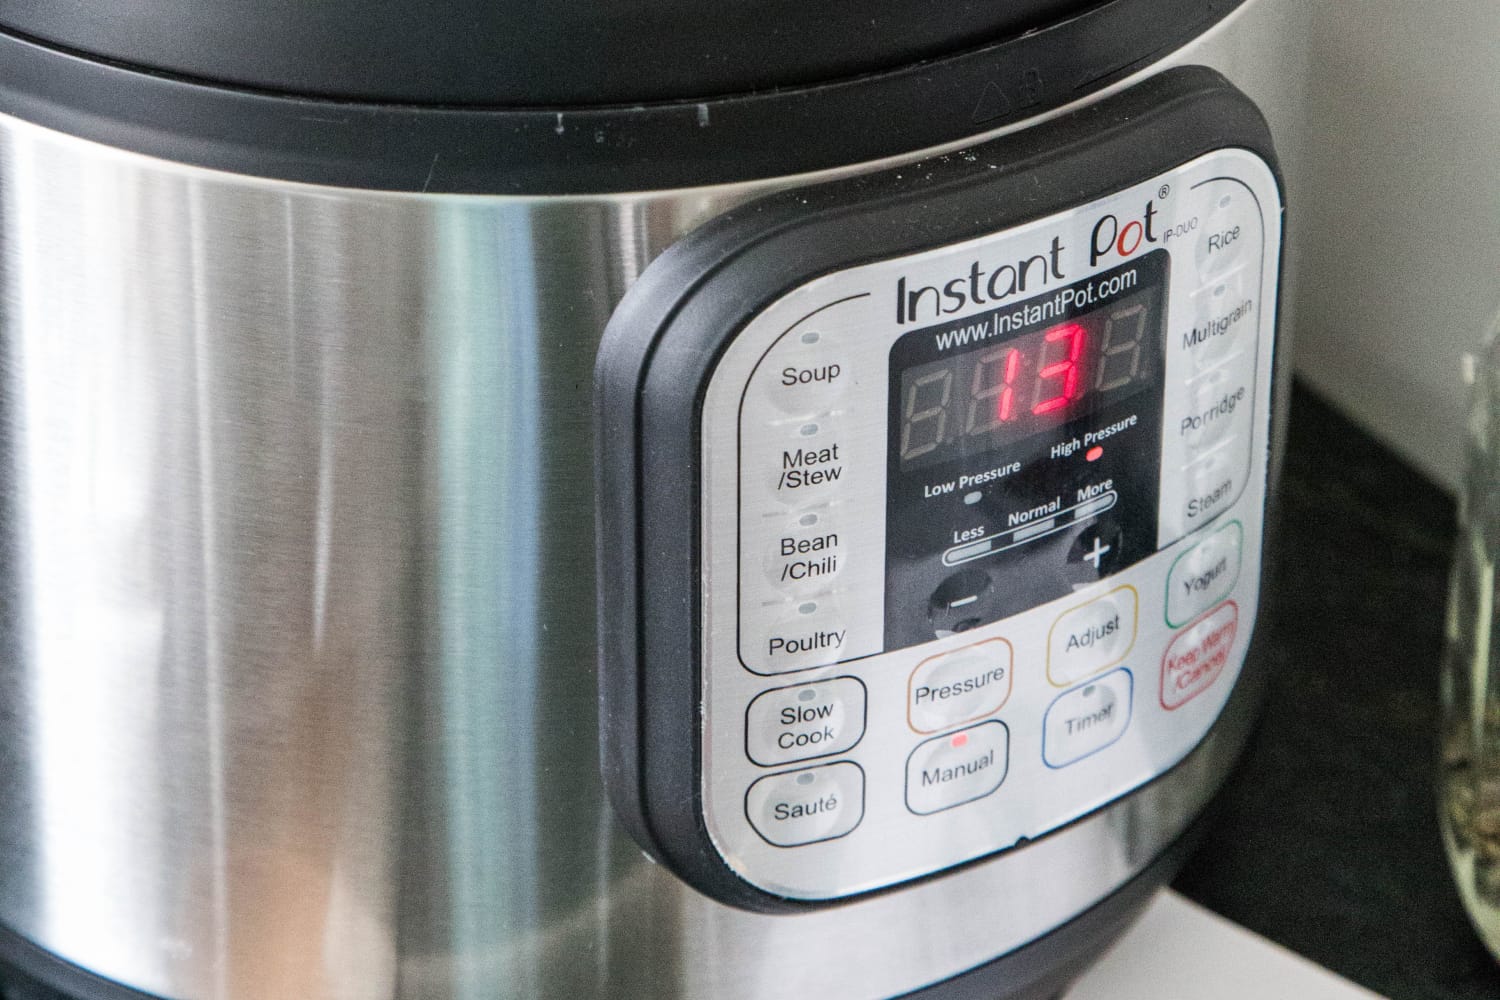 NYT Cooking - How to Use an Instant Pot